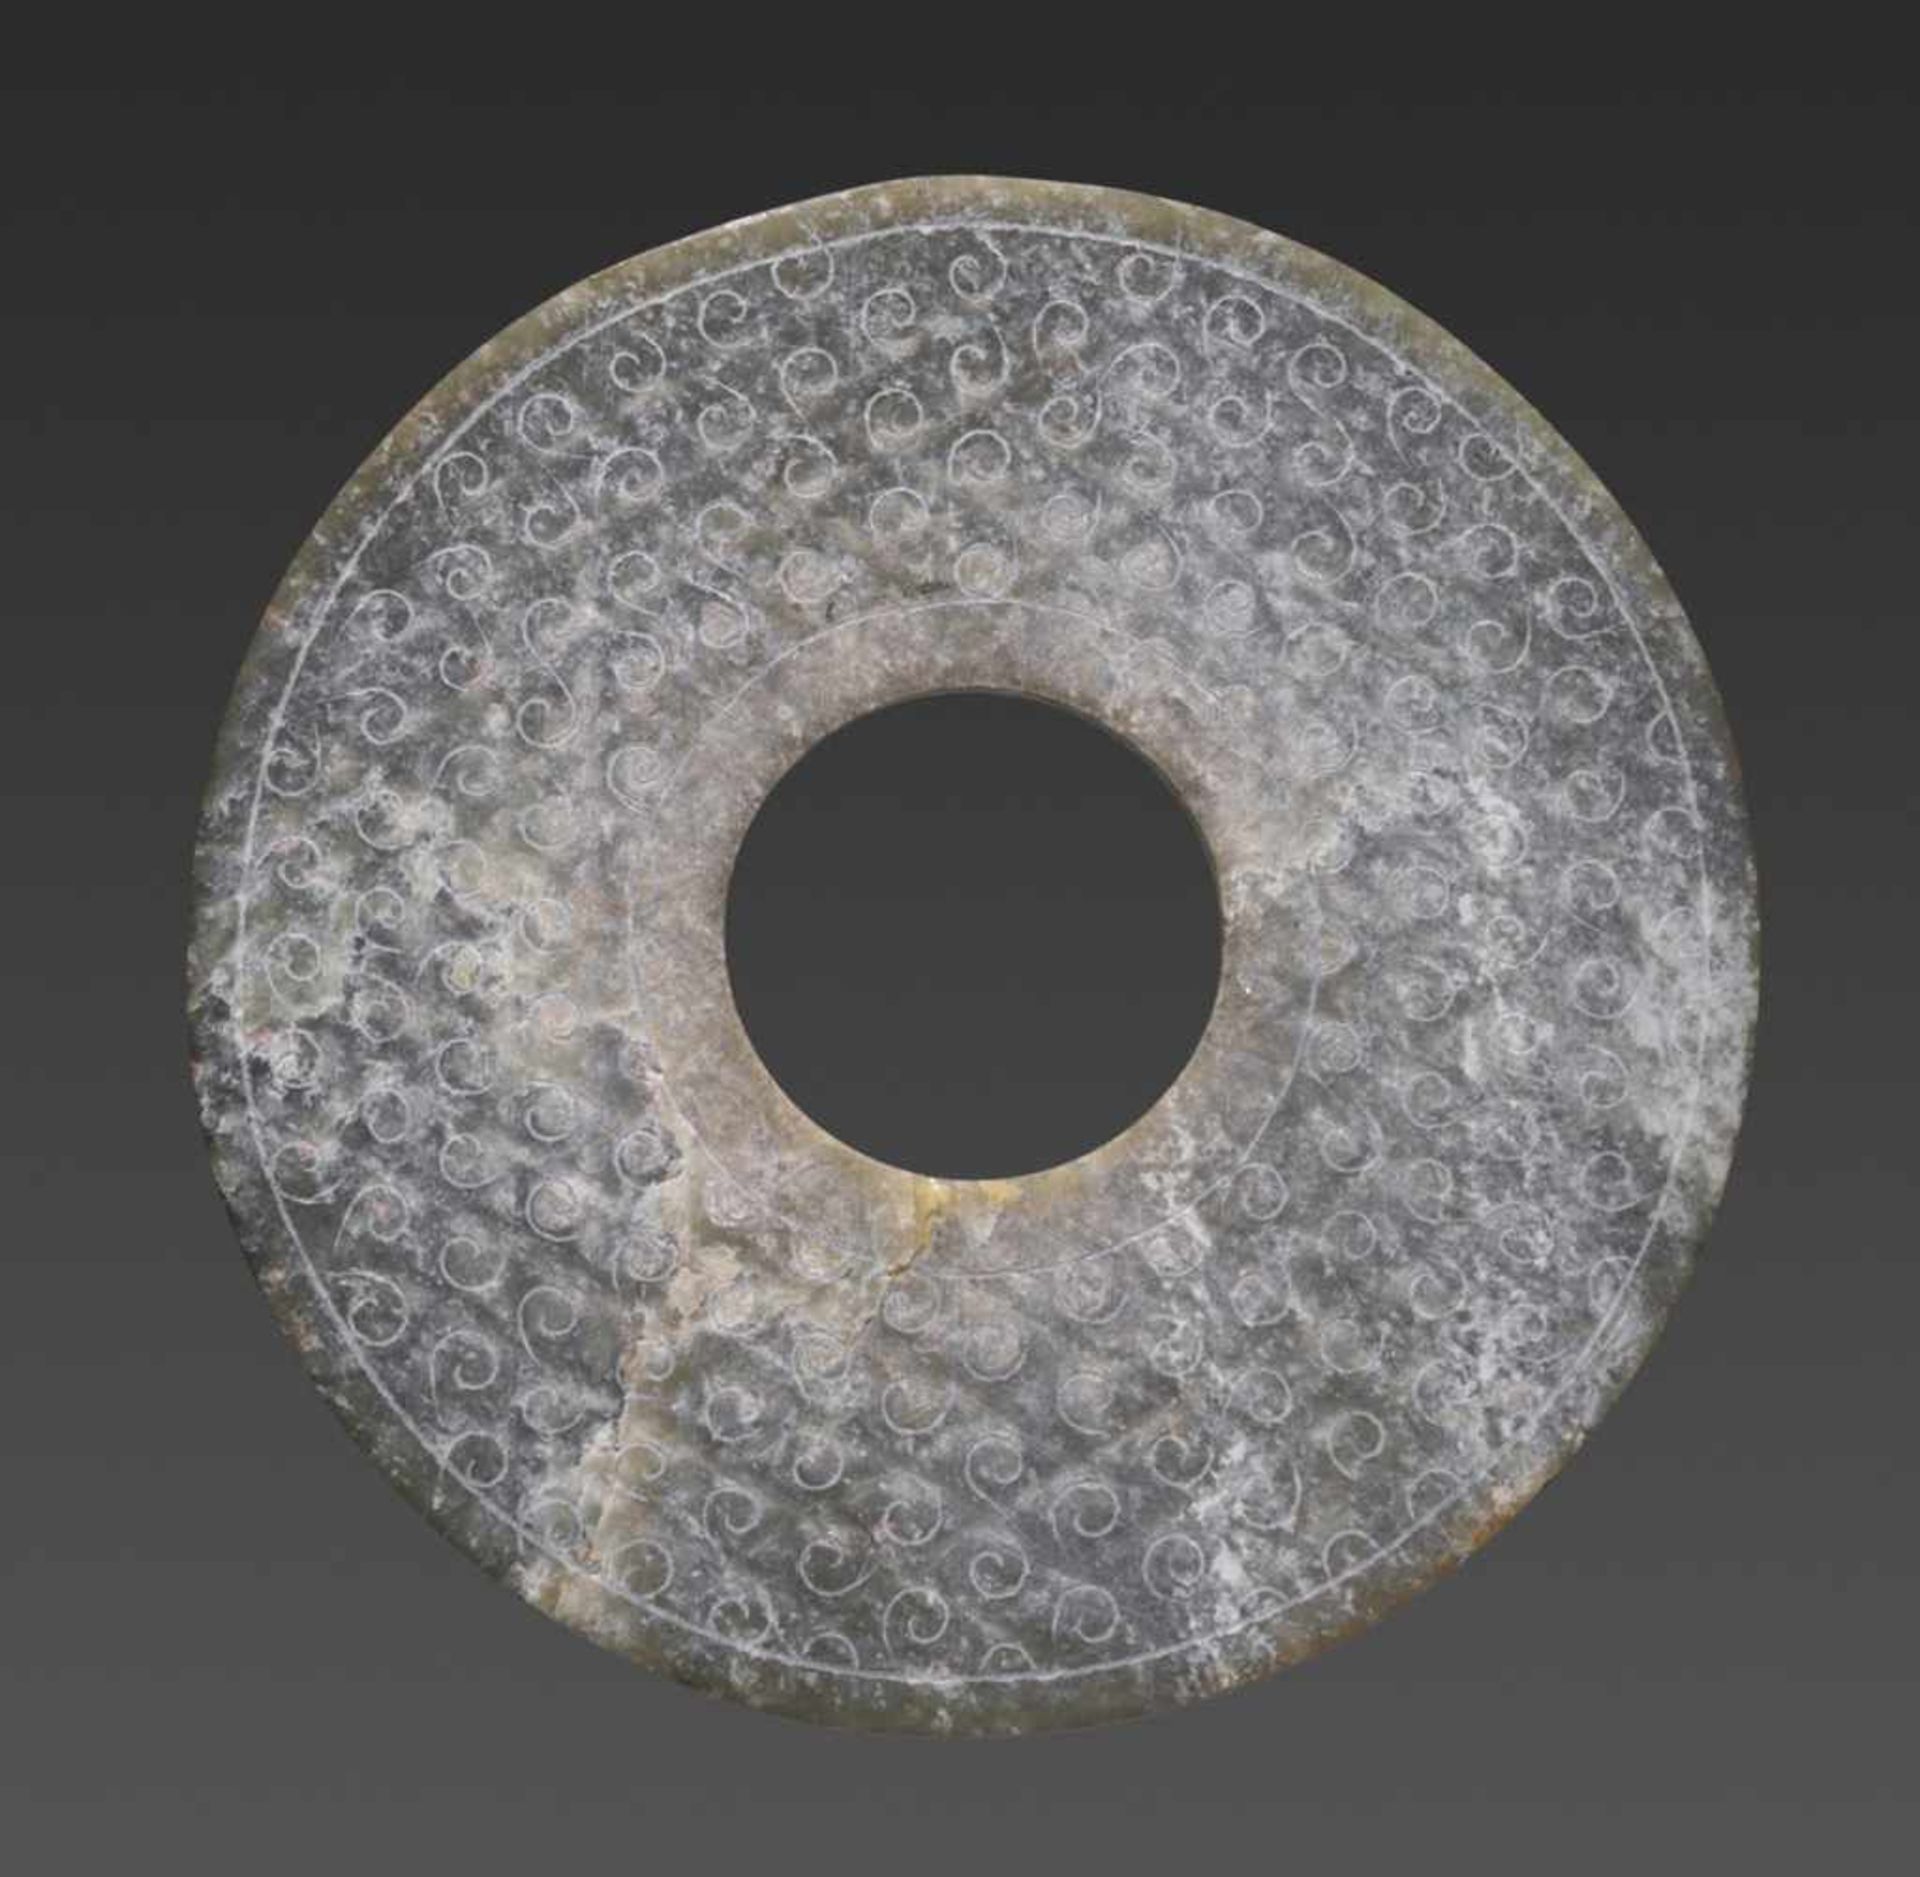 A REFINED CHARCOAL GREY DISC WITH ENGRAVED CURLS Jade. China, Han Dynasty, 2nd century BC 穀紋玉璧 - 漢代, - Image 2 of 8